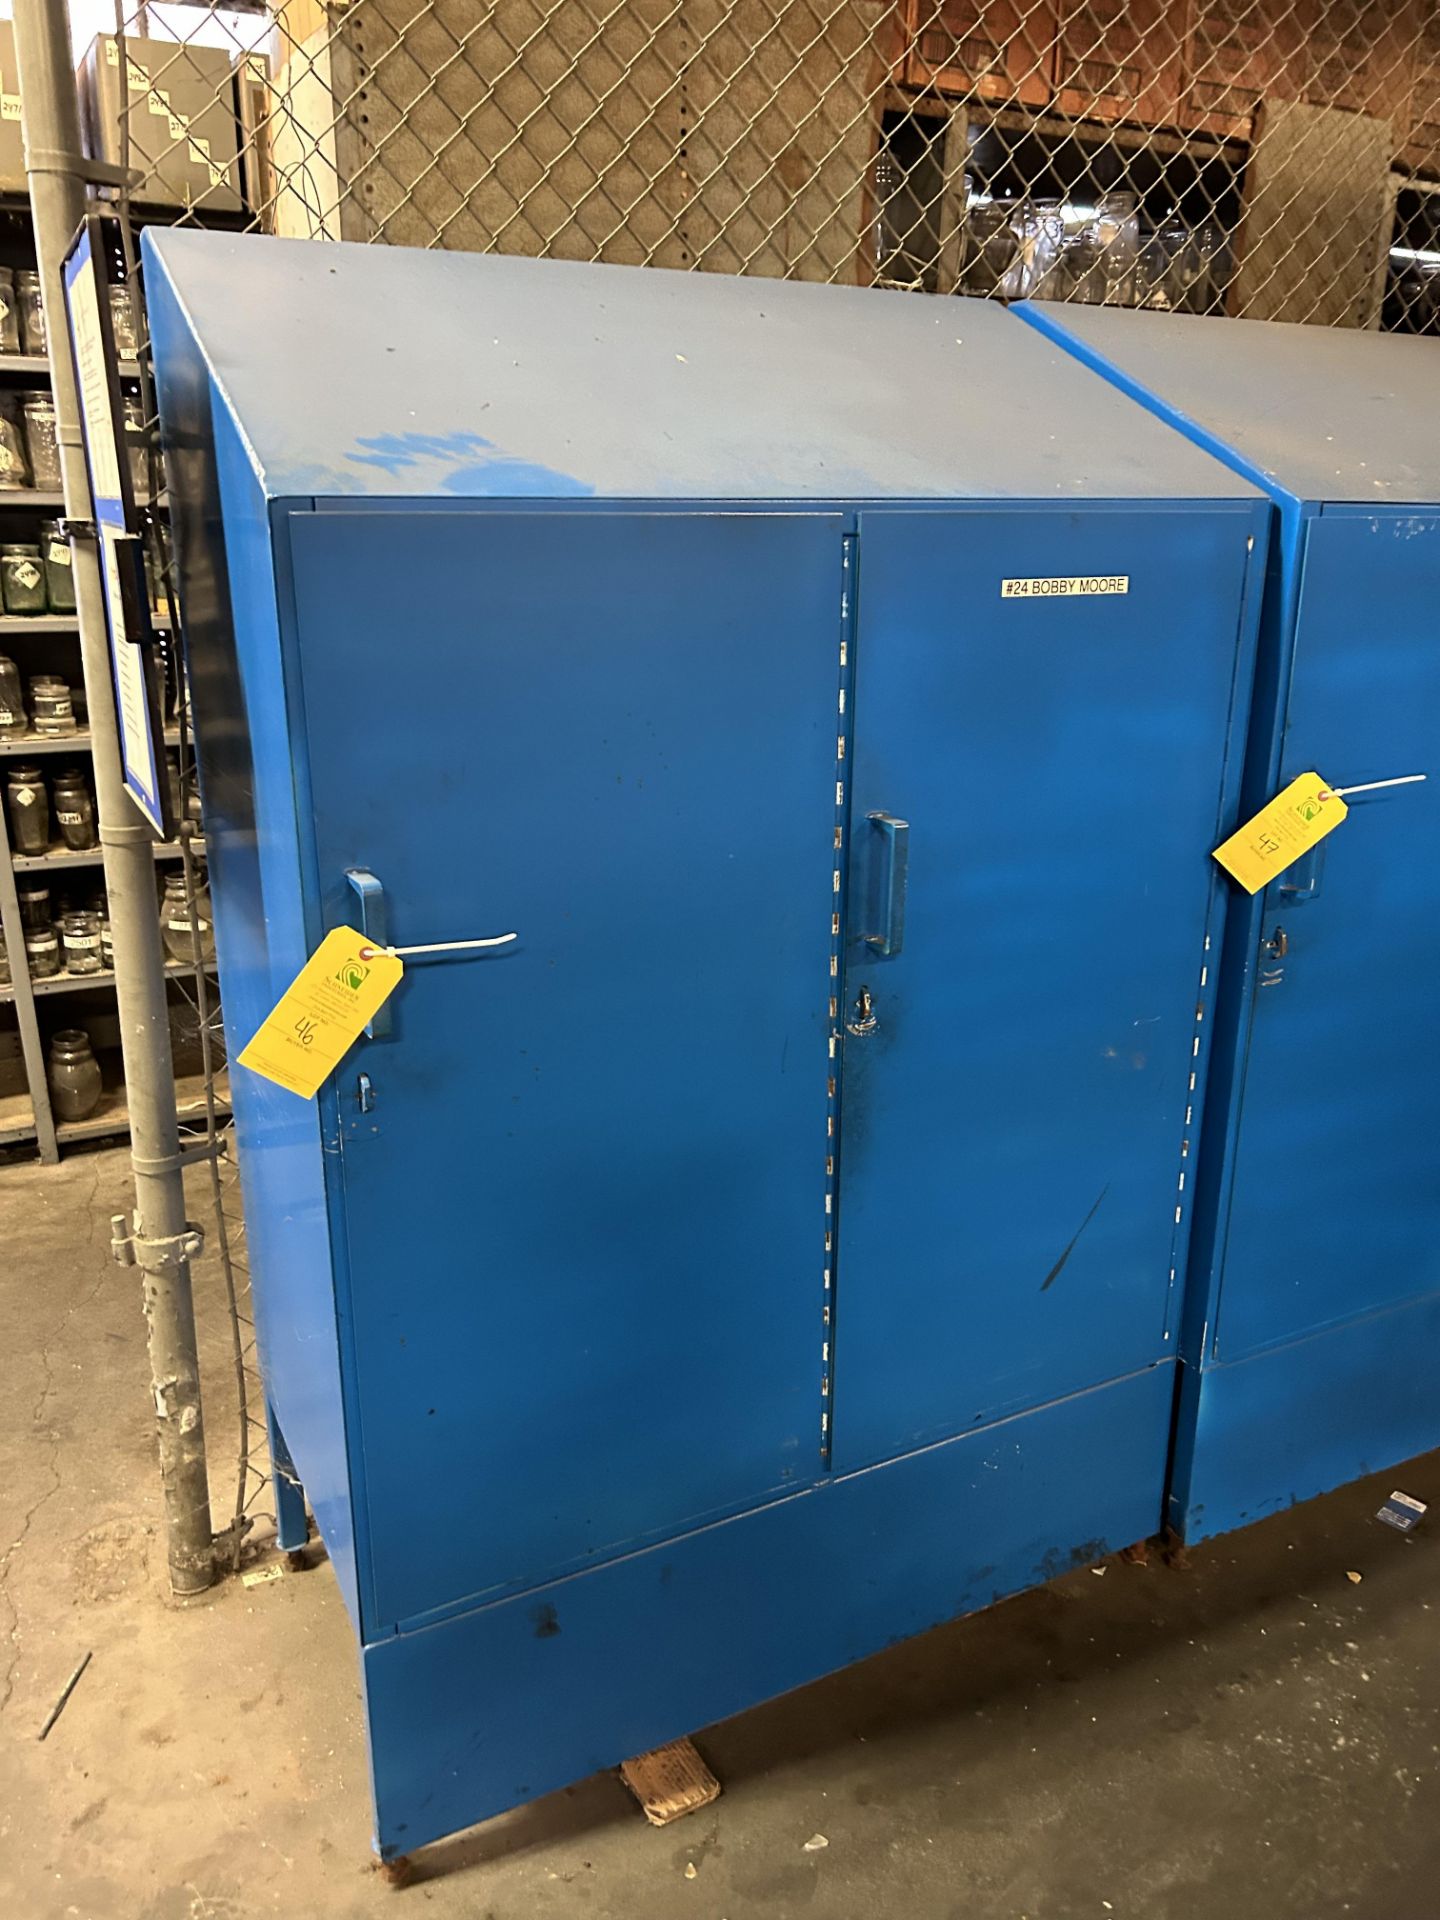 Blue Storage Cabinet, Approx. 5ft. T x 4ft. W x 2.5ft. L, Rigging/ Removal Fee - $75